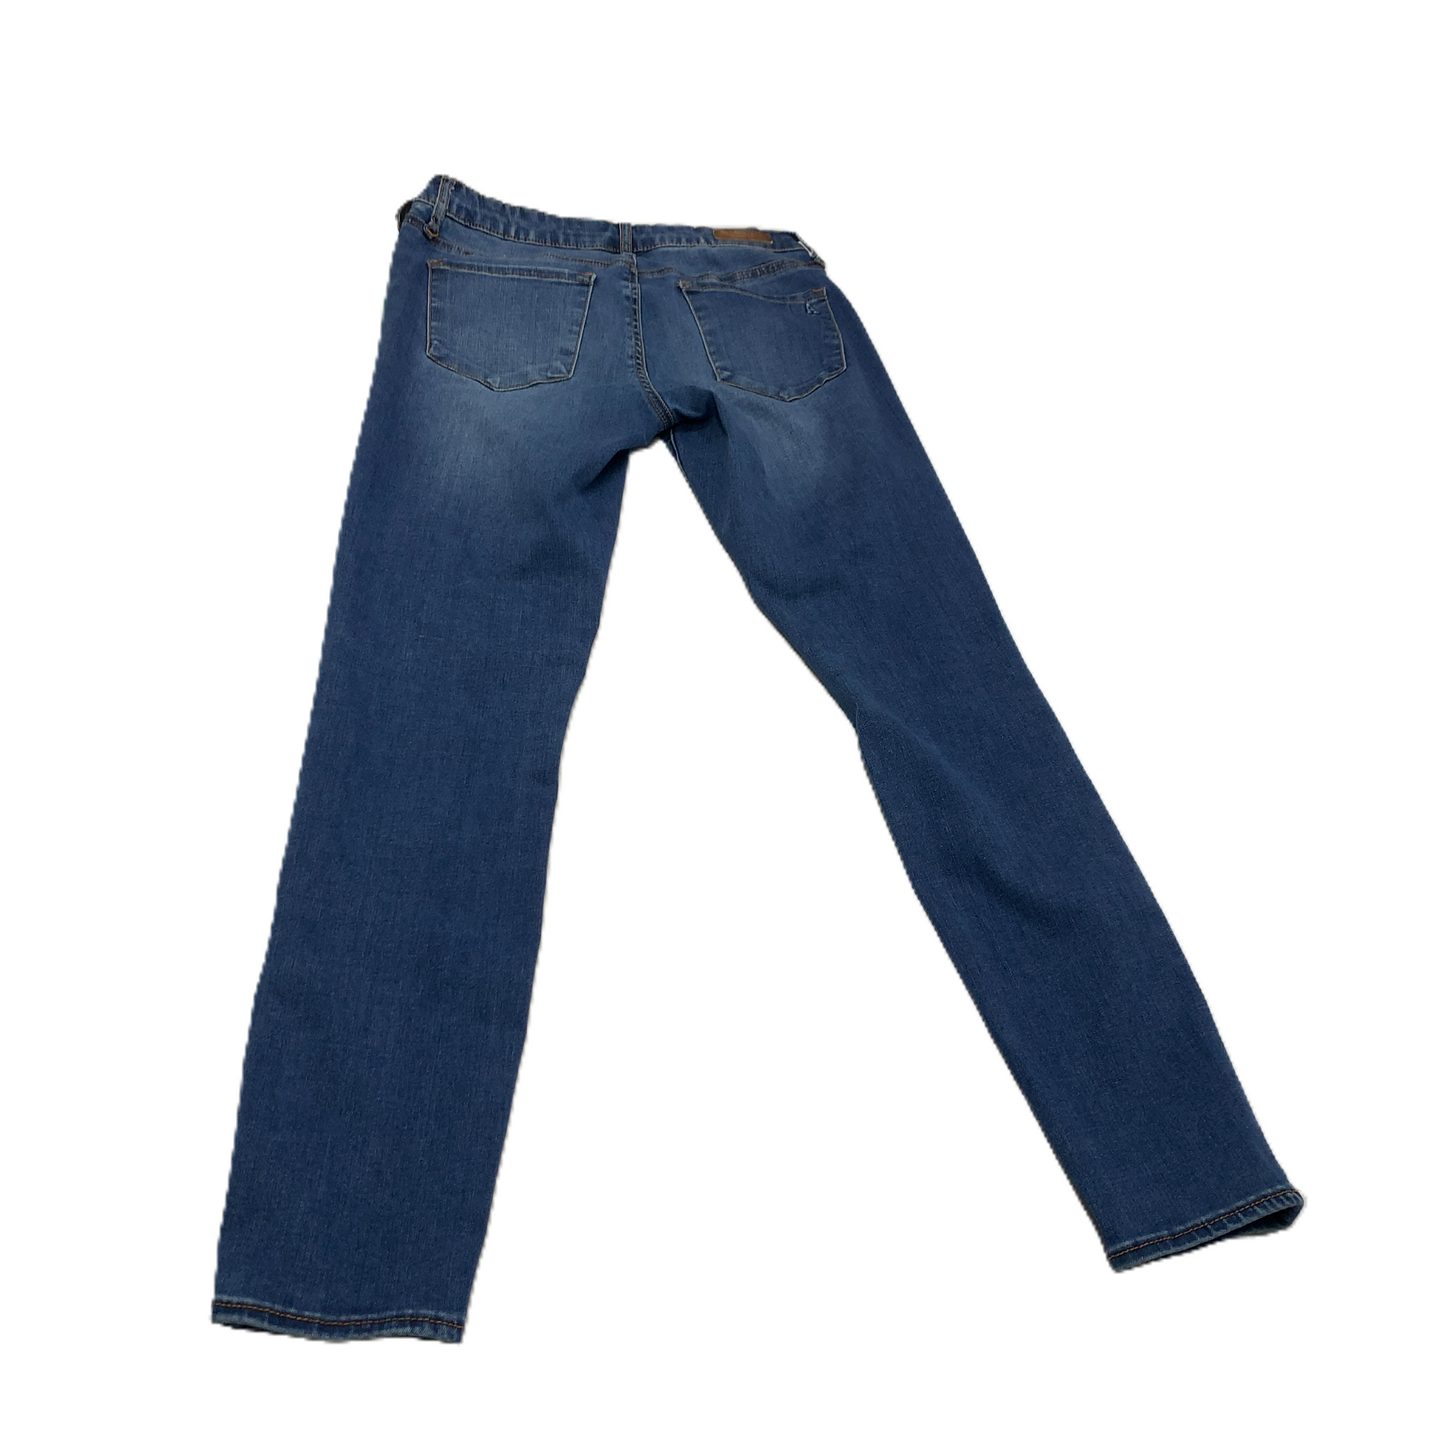 Jeans Skinny By Articles Of Society  Size: 4